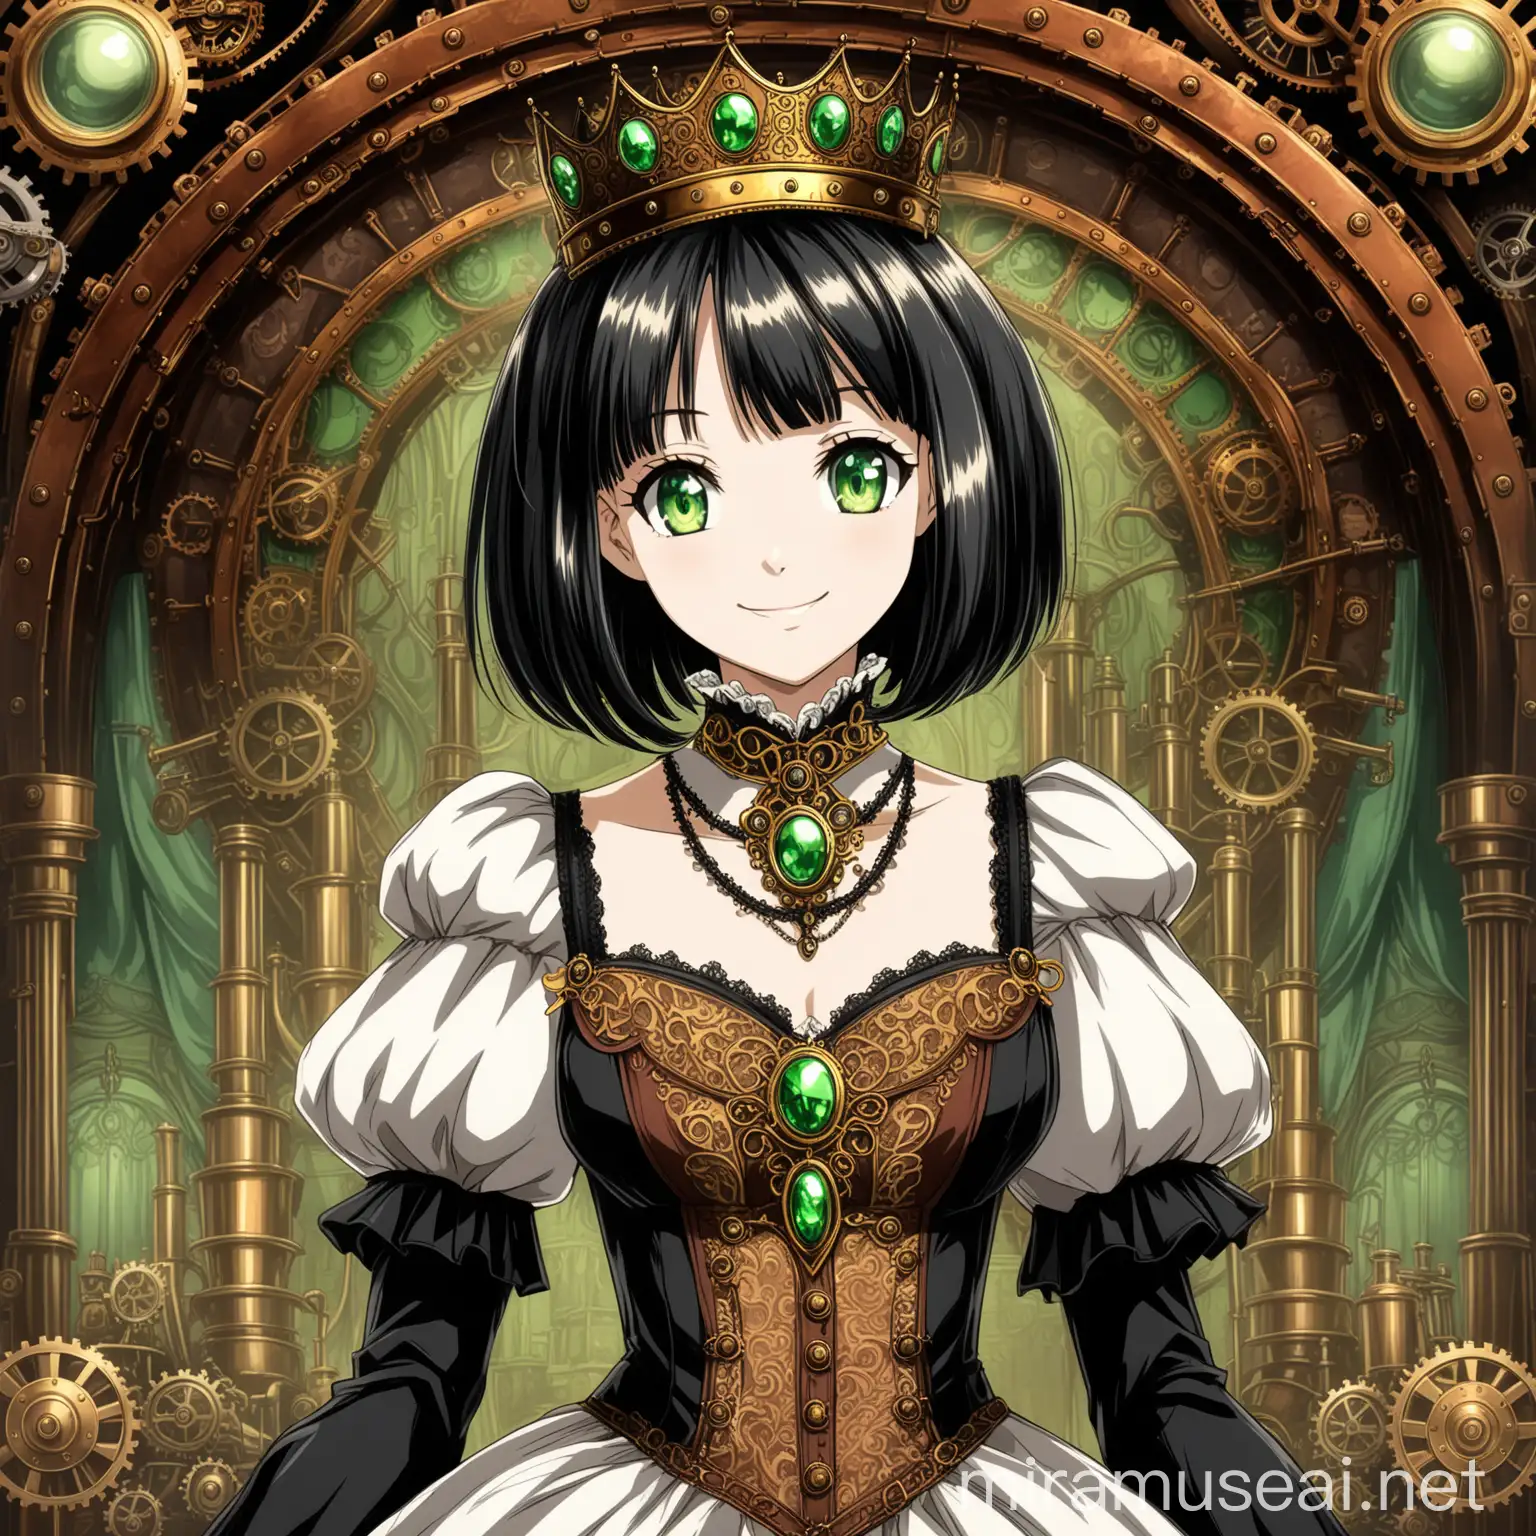 Visualize a adult woman with beautiful but nostalgic features and (black, layered bob hair with bangs), dressed in ornate (Victorian princess dress), and green eyes and a smile on her face, she has a steel crown, on a steampunk background. in anime